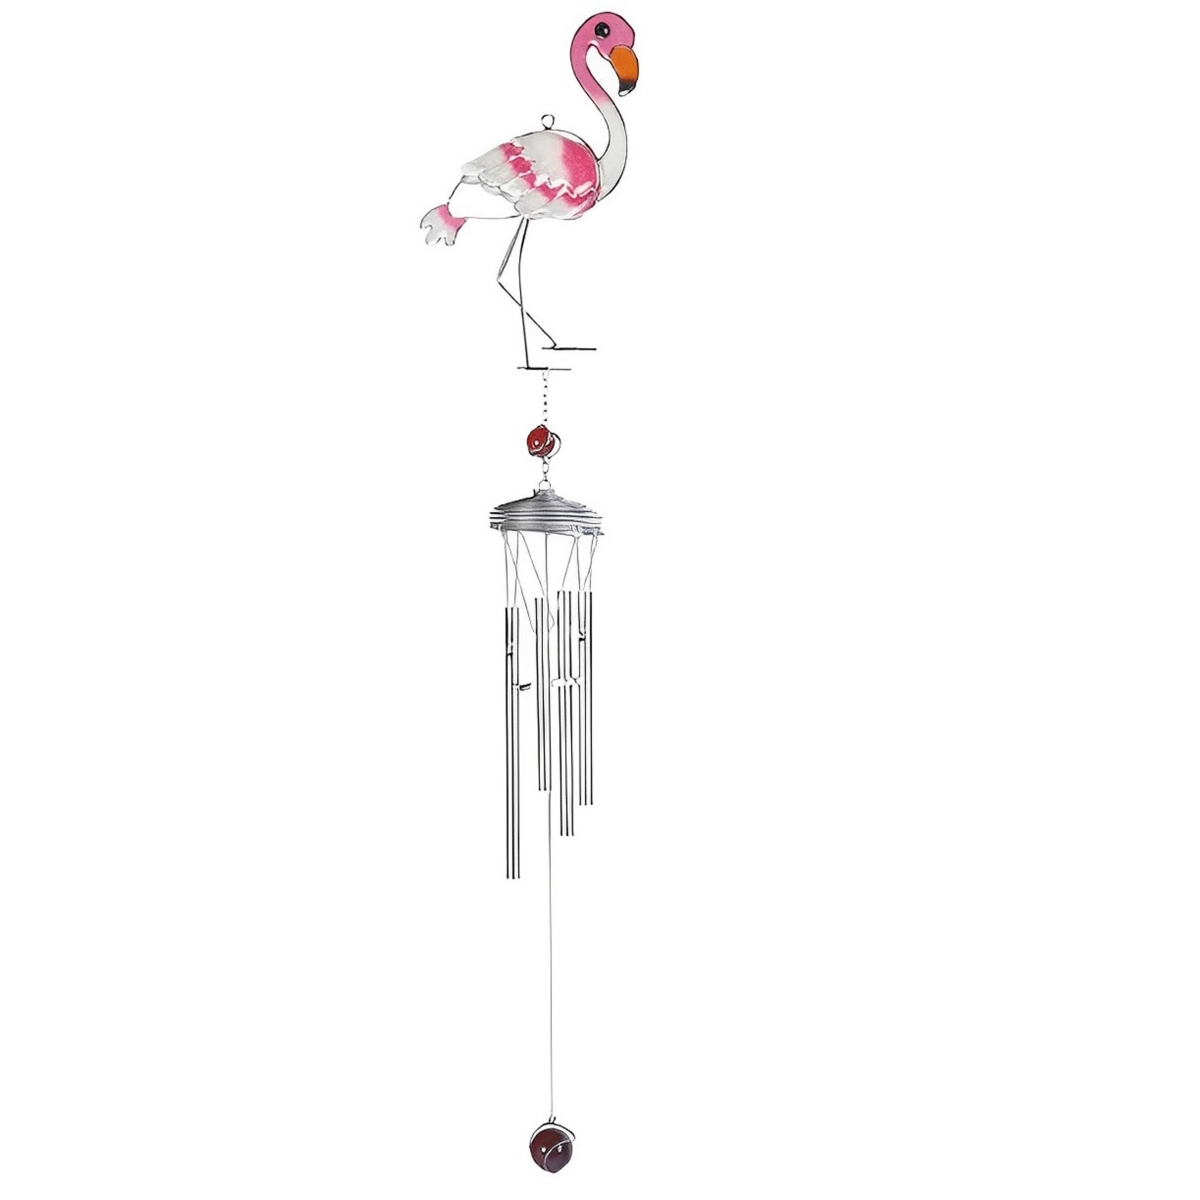 35"Long Flamingo Suncatcher Wind Chime with Silver Gem Home Decor Perfect Gift for House Warming, Holidays and Birthdays - Silver